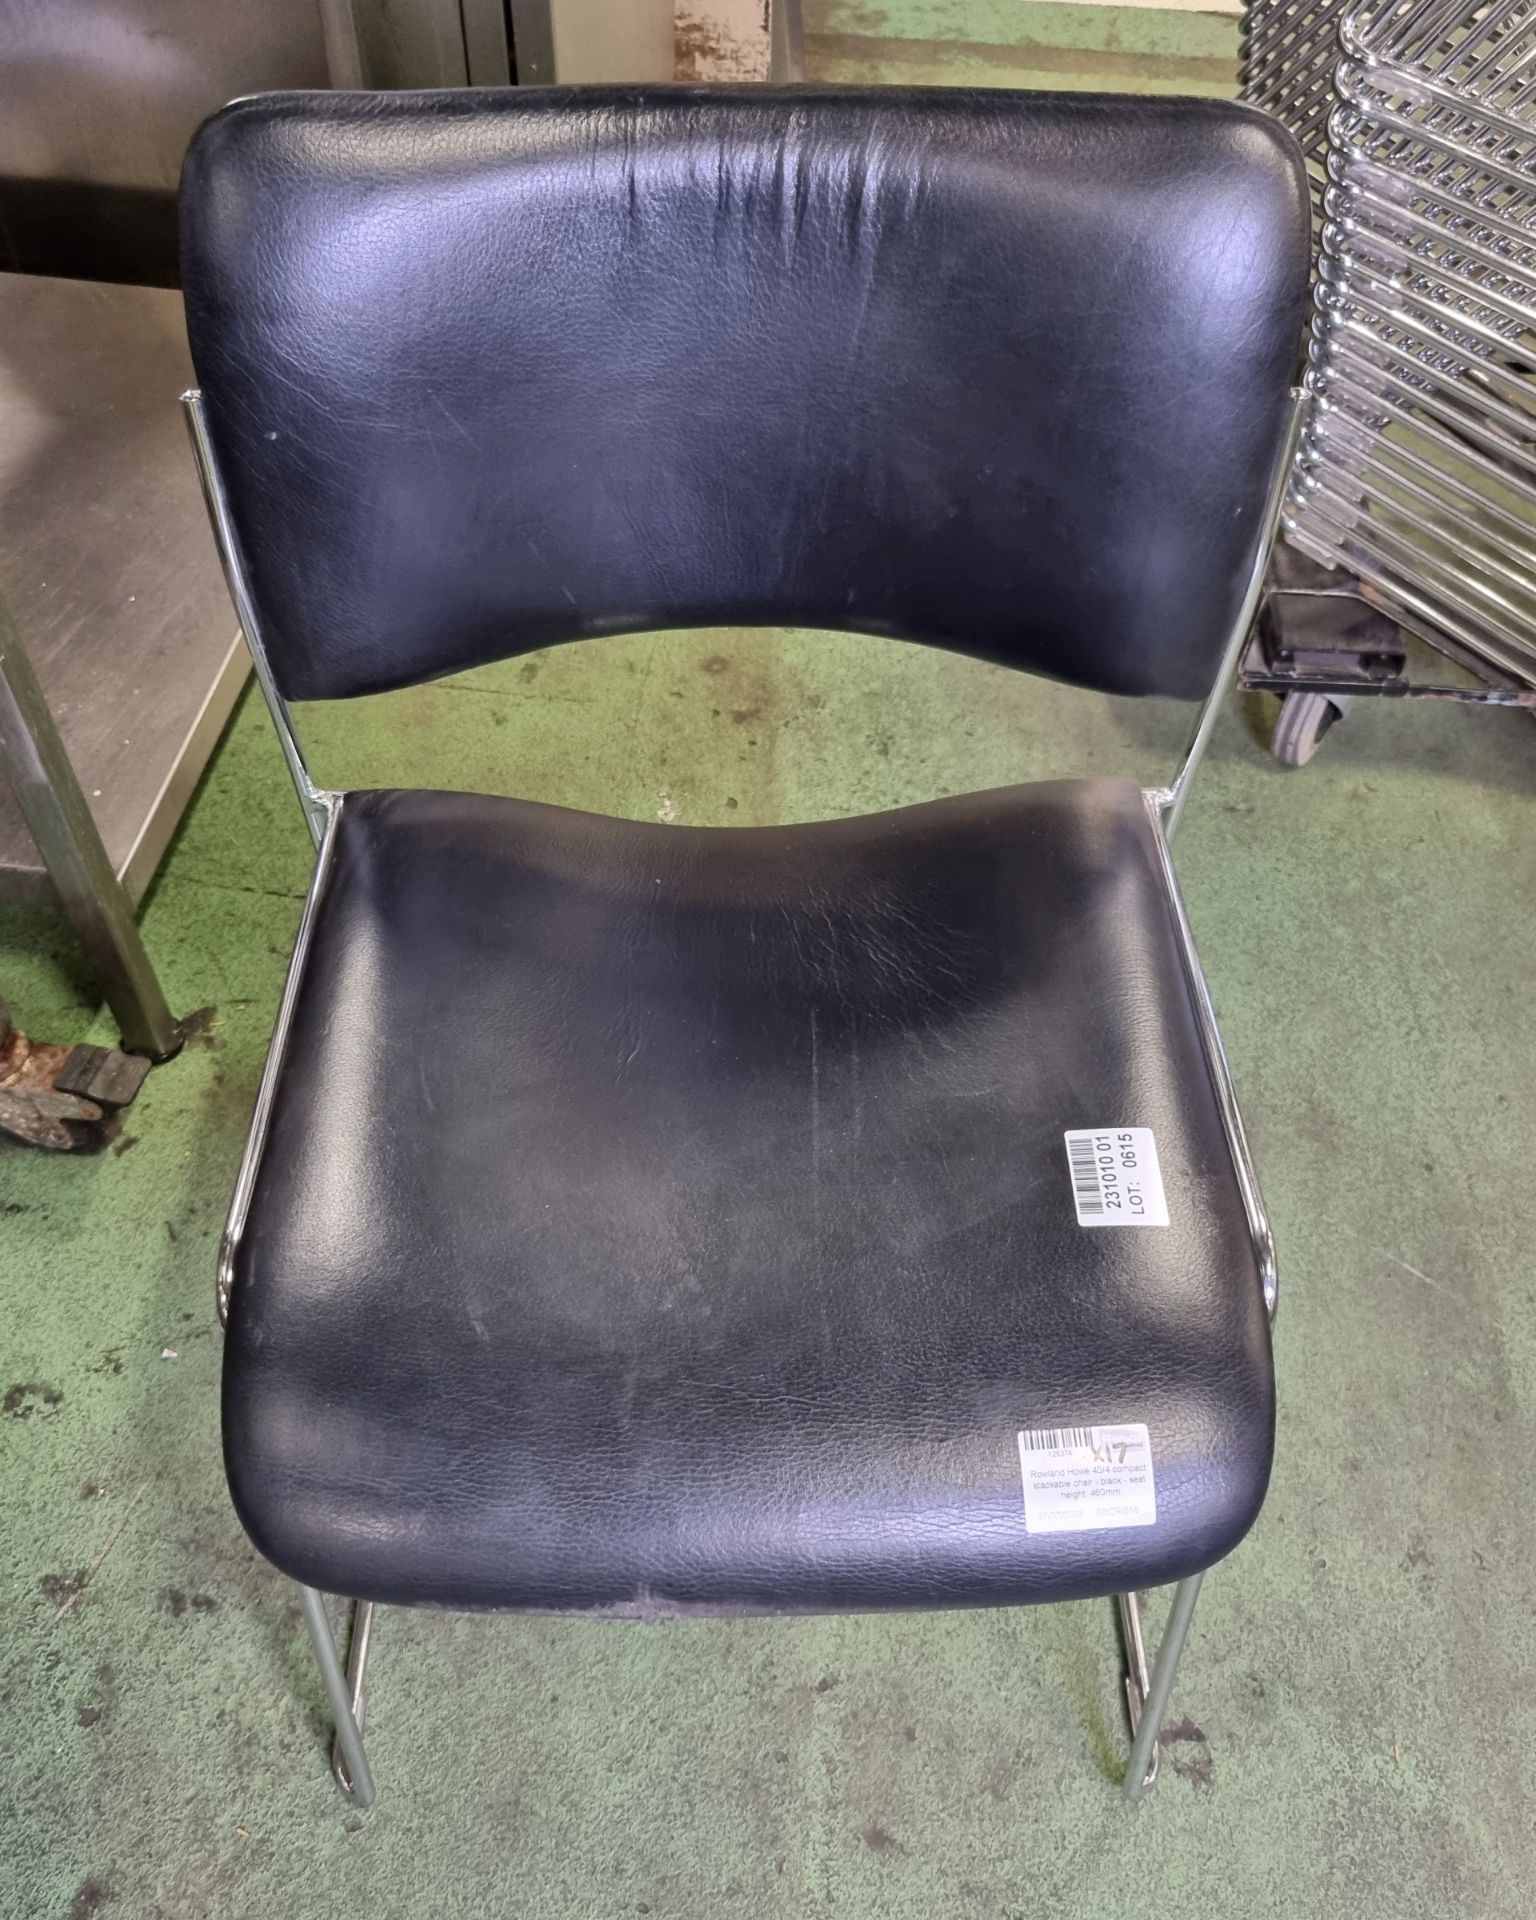 17x Rowland Howe 40/4 compact stackable chairs - black - seat height: 460mm - Bild 3 aus 4